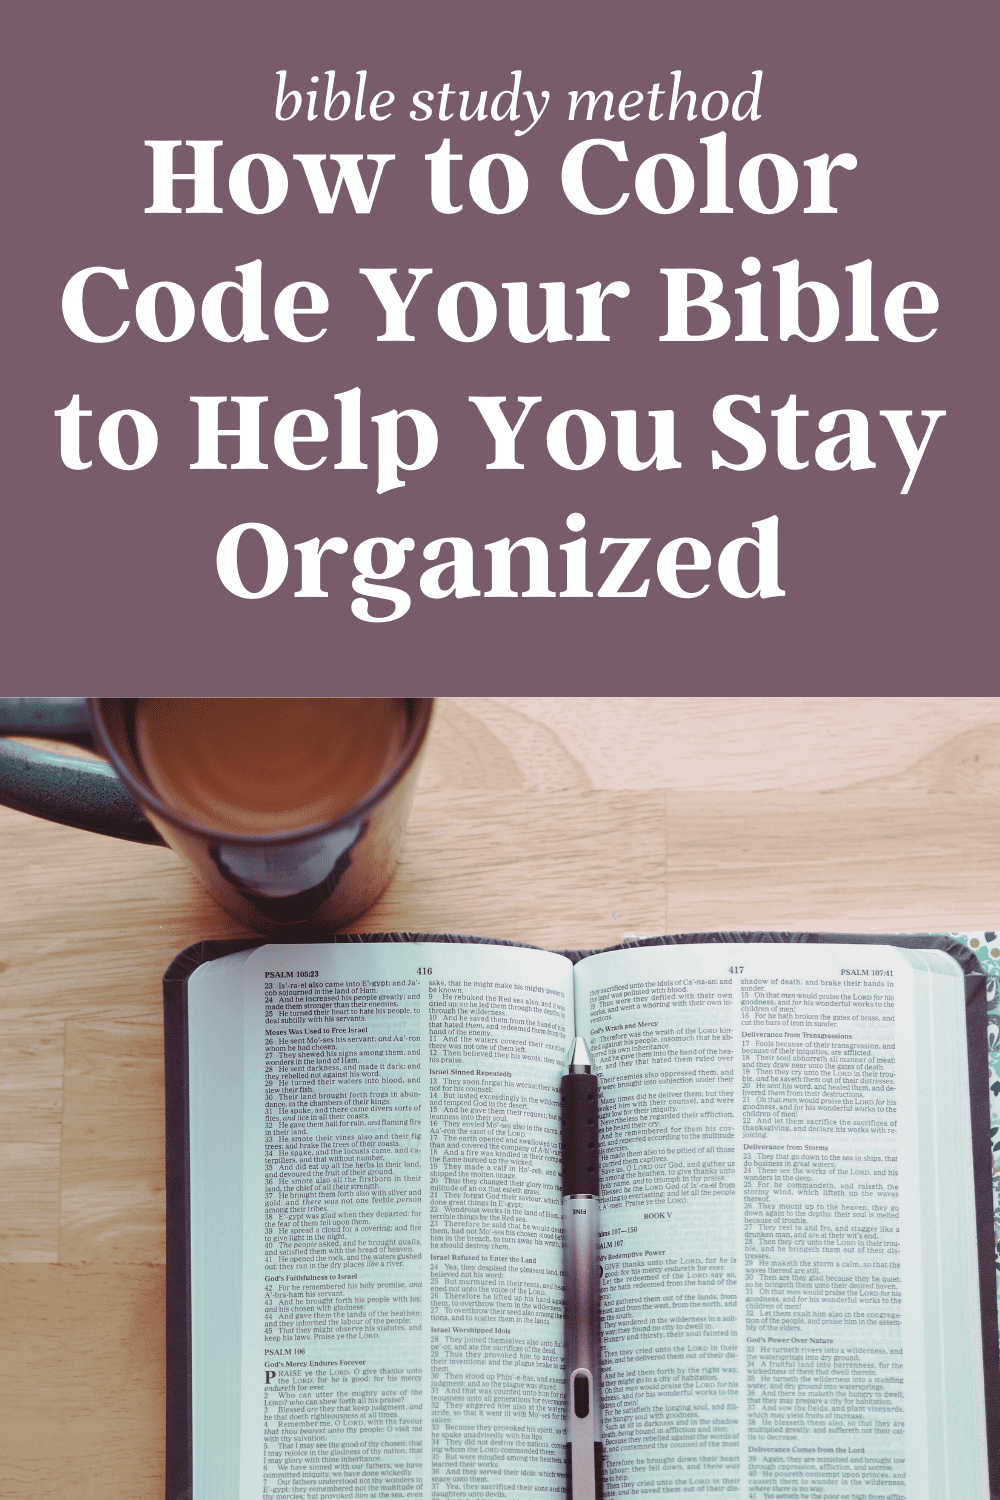 Do you need help organizing your notes for bible study? Learn how to color code your bible so that you can go deeper in the word and grow closer to God. Highlighting your bible is a great bible study method for beginners and so easy to get started for everyone.